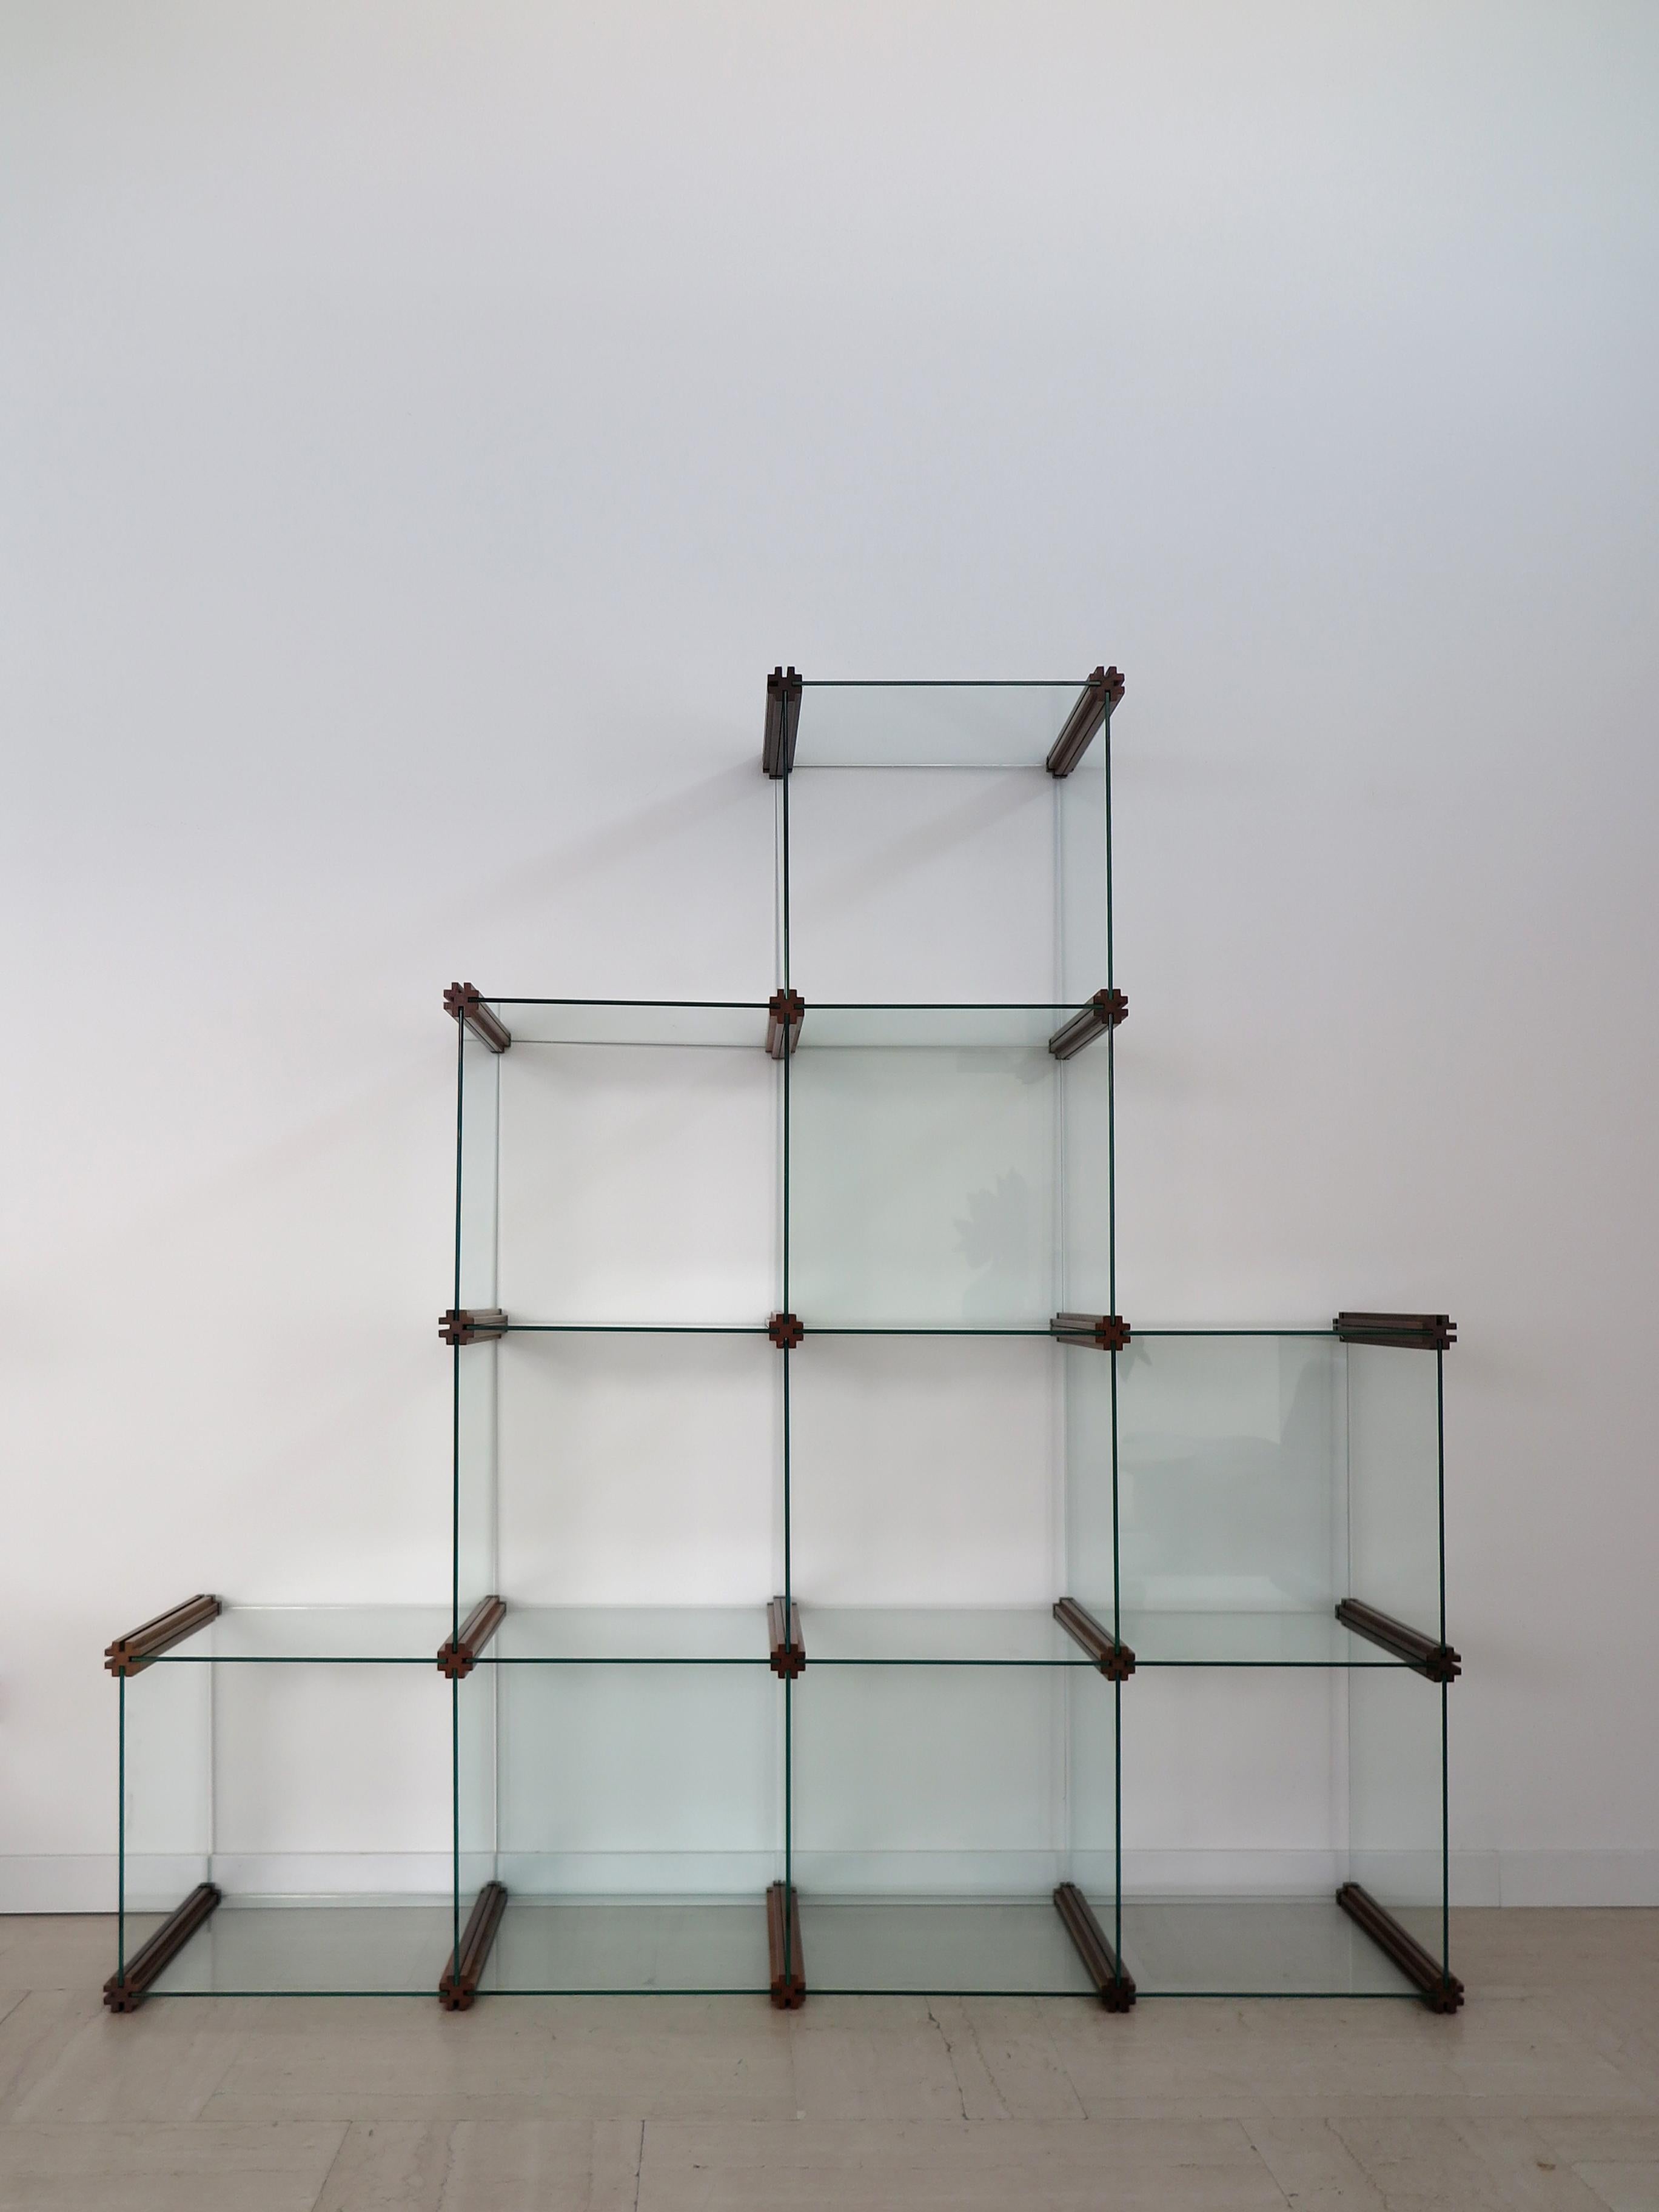 Italian modular glass bookcase, designed by Pierangelo Gallotti and produced by Gallotti e Radice with interlocking glass modular elements on shaped solid wood frames, Italy production 1980.
The bookcase consists of 28 glass elements that make up